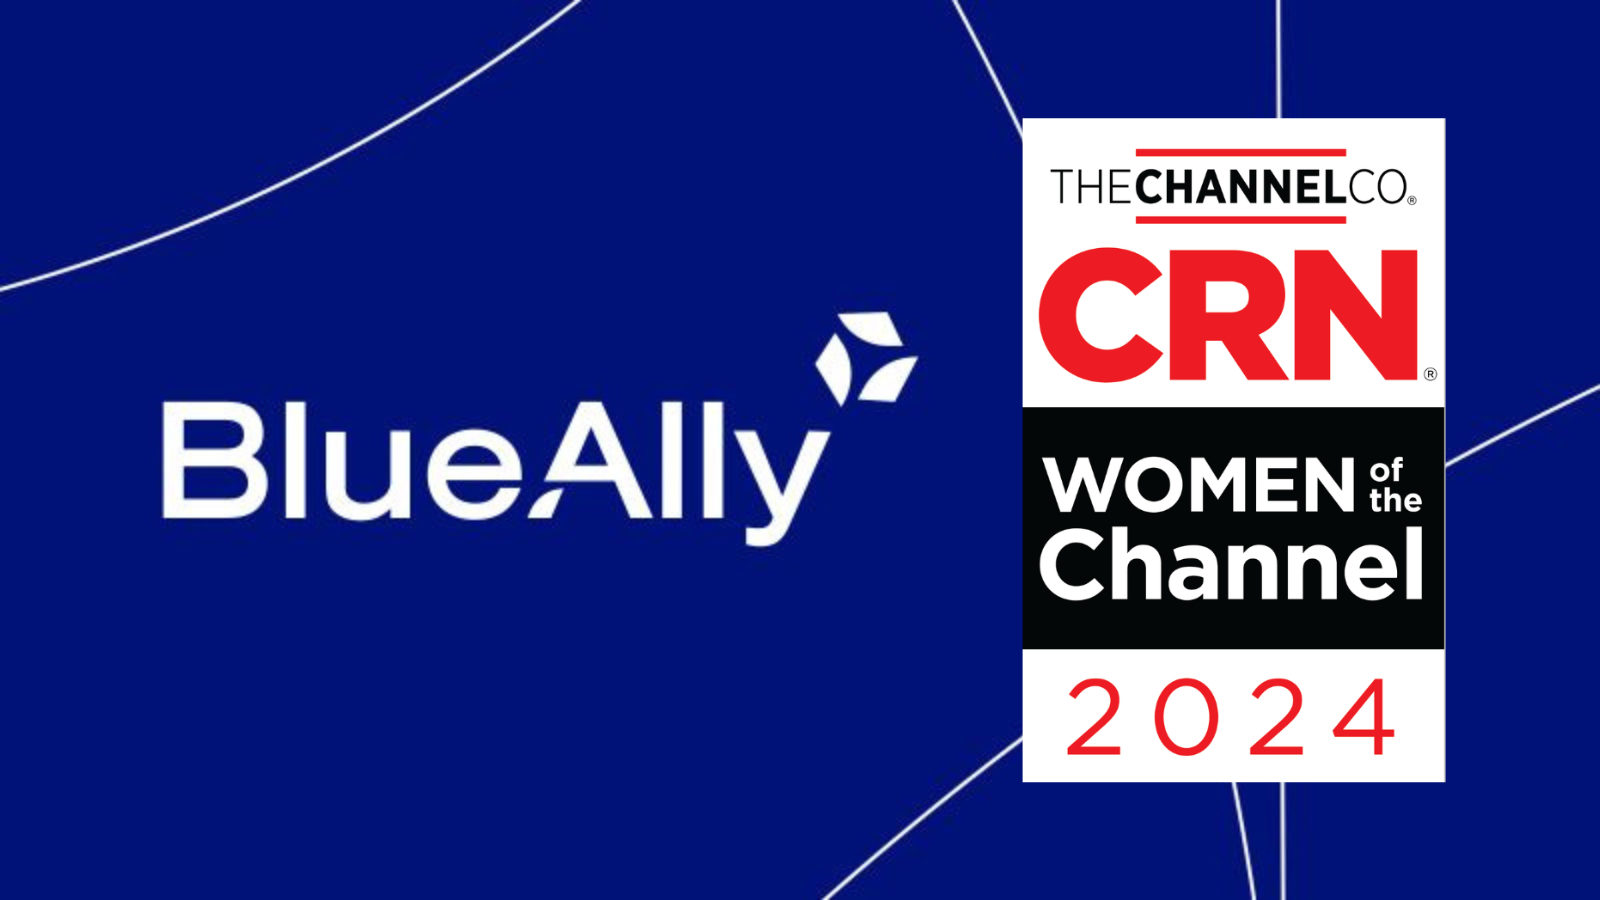 CRN Recognizes Dianne Callies-Prohaska of BlueAlly on the 2024 Women of the Channel List